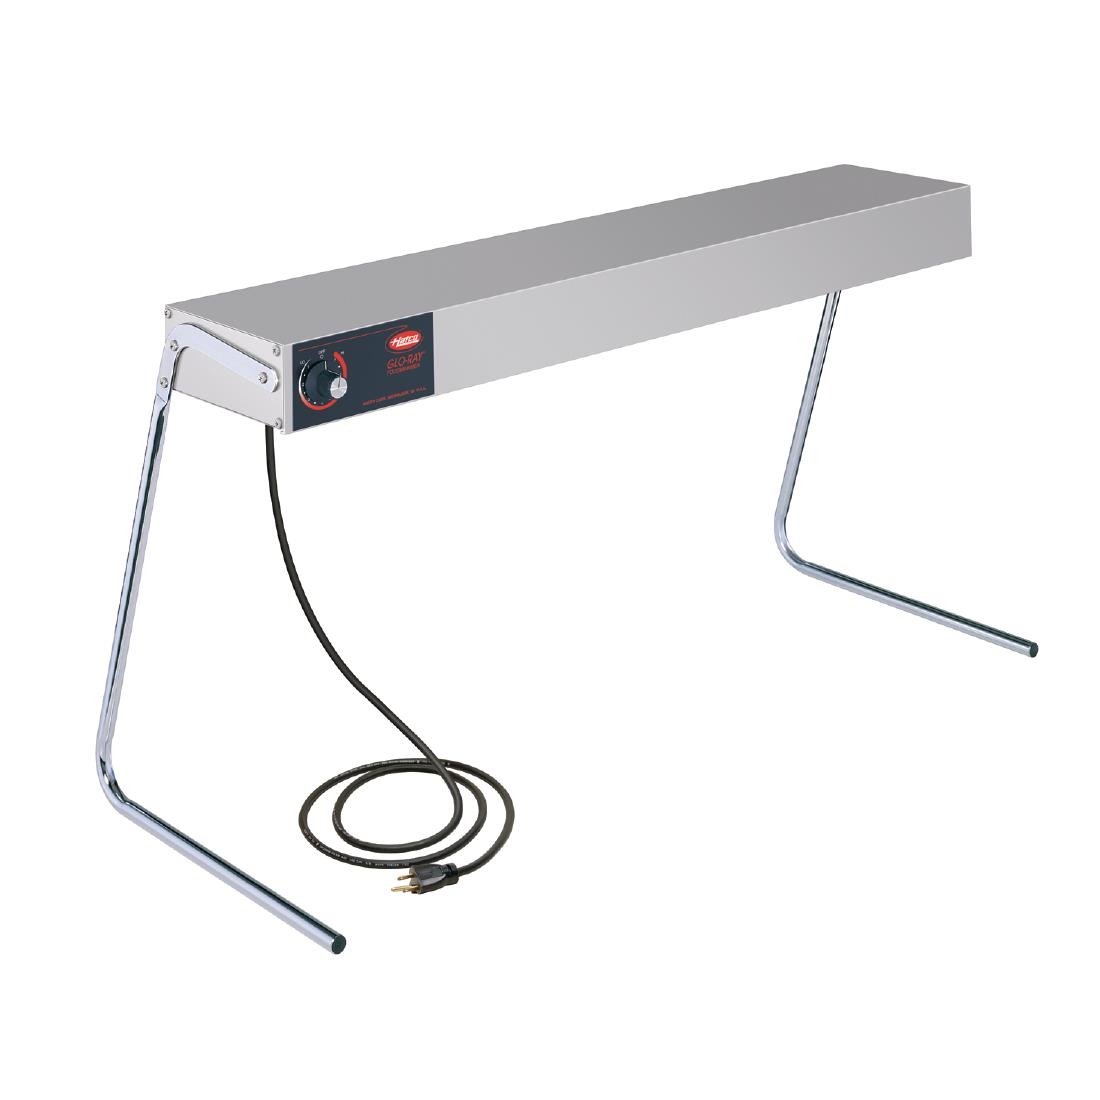 Hatco Glo-Ray Electric Food Warmer GRAHL 24 JD Catering Equipment Solutions Ltd